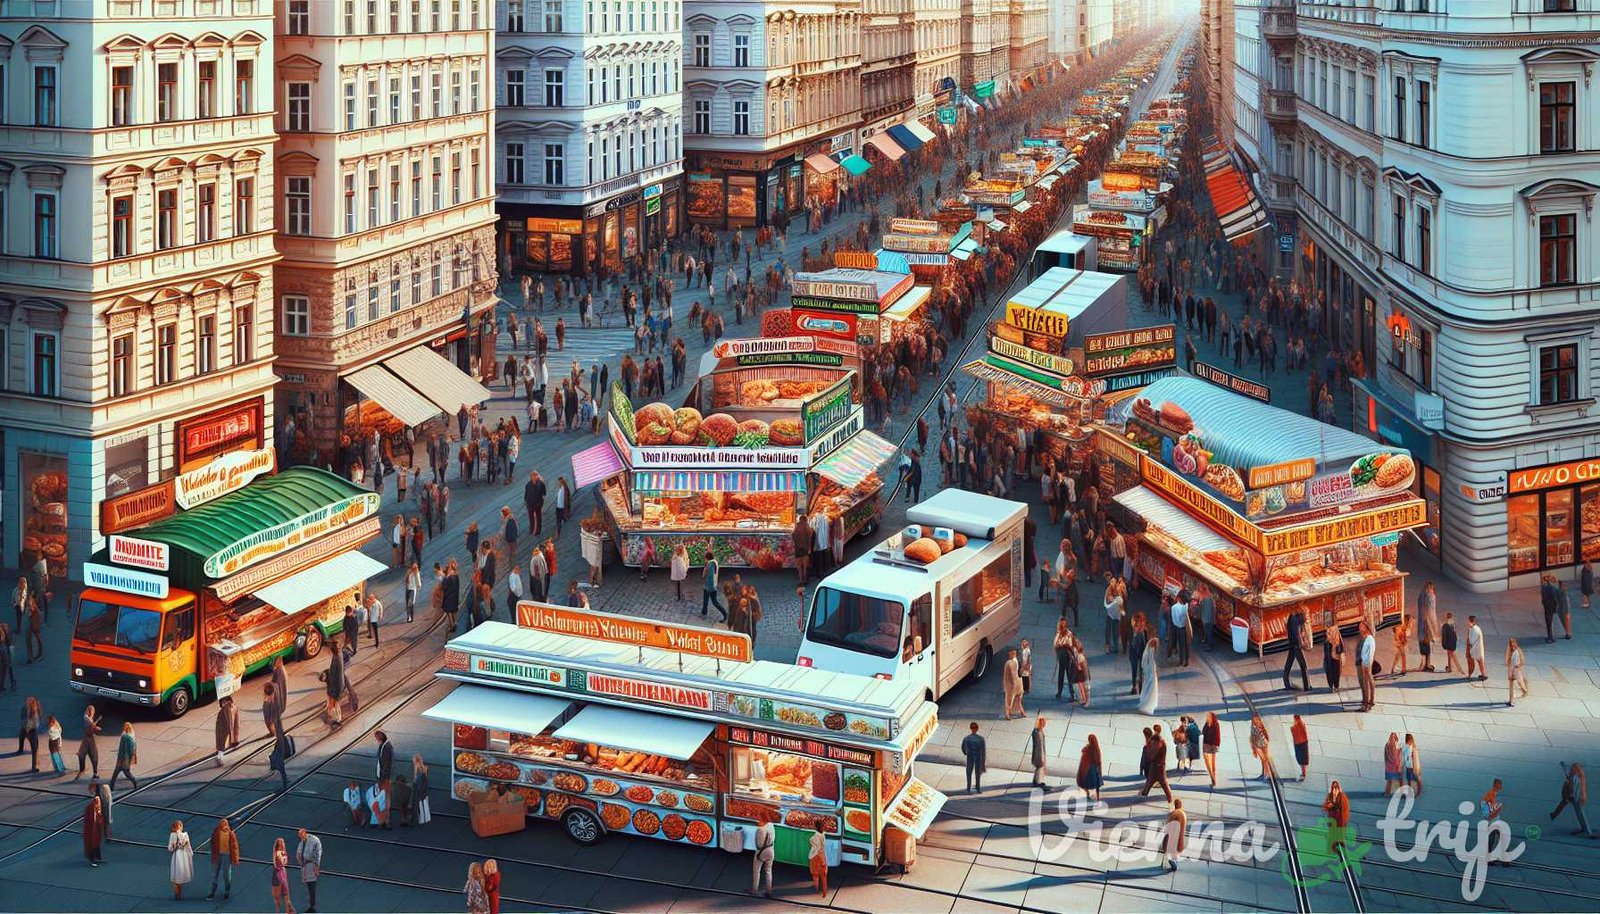 Illustration for section: Viennese Street Food: A Taste of Tradition While Viennese cuisine is often associated with fine dini - vienna delights